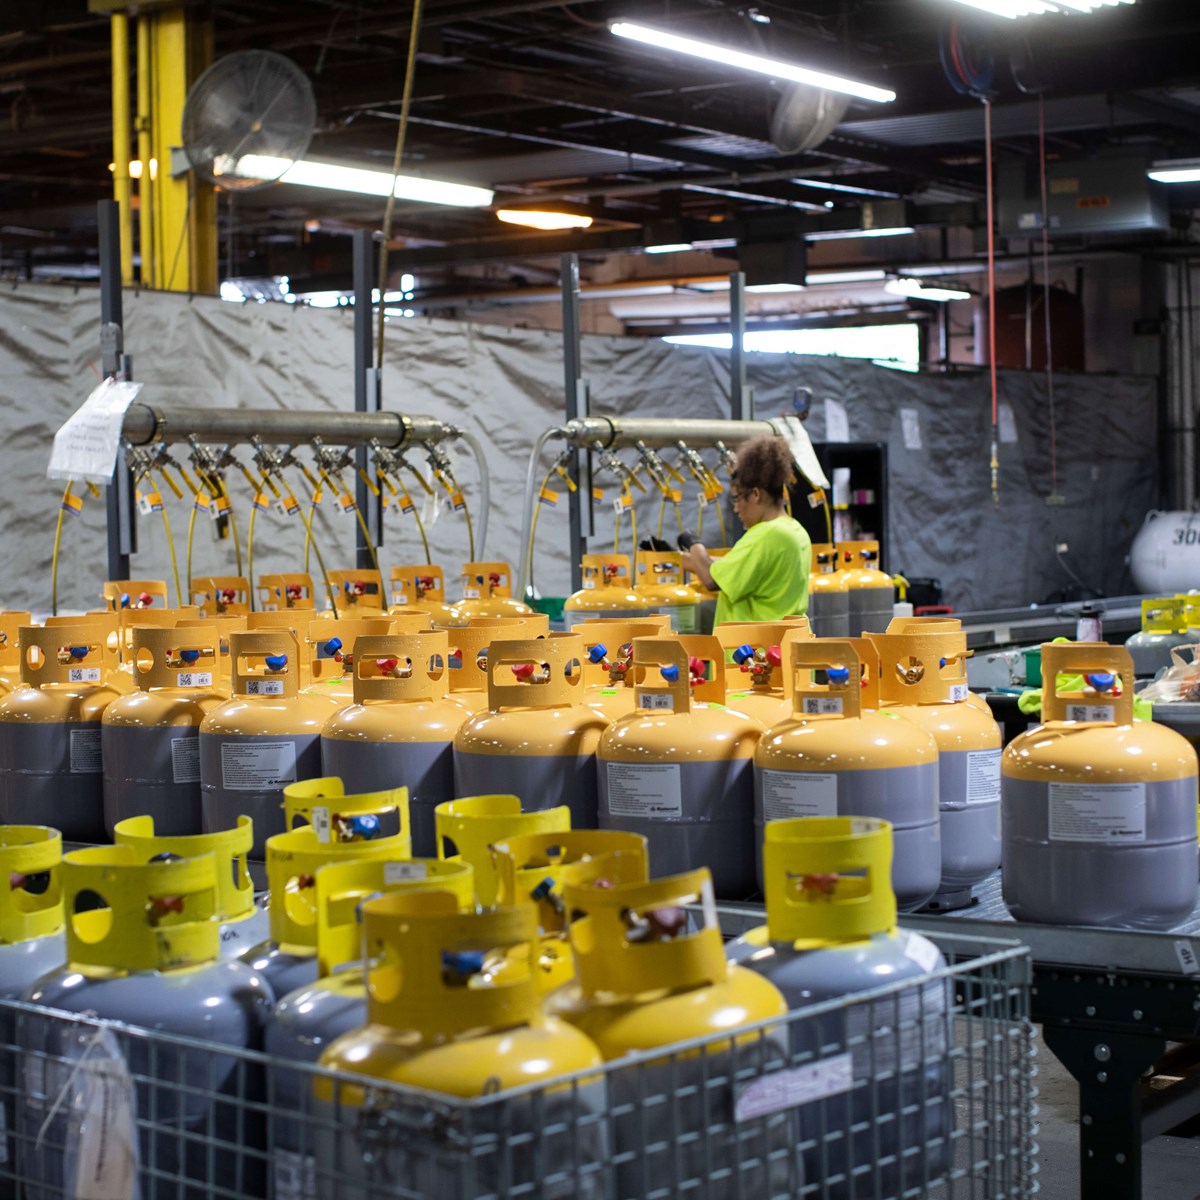 A wide shot of lots of yellow and grey cylinders with a woman working in the warehouse with the cylinders